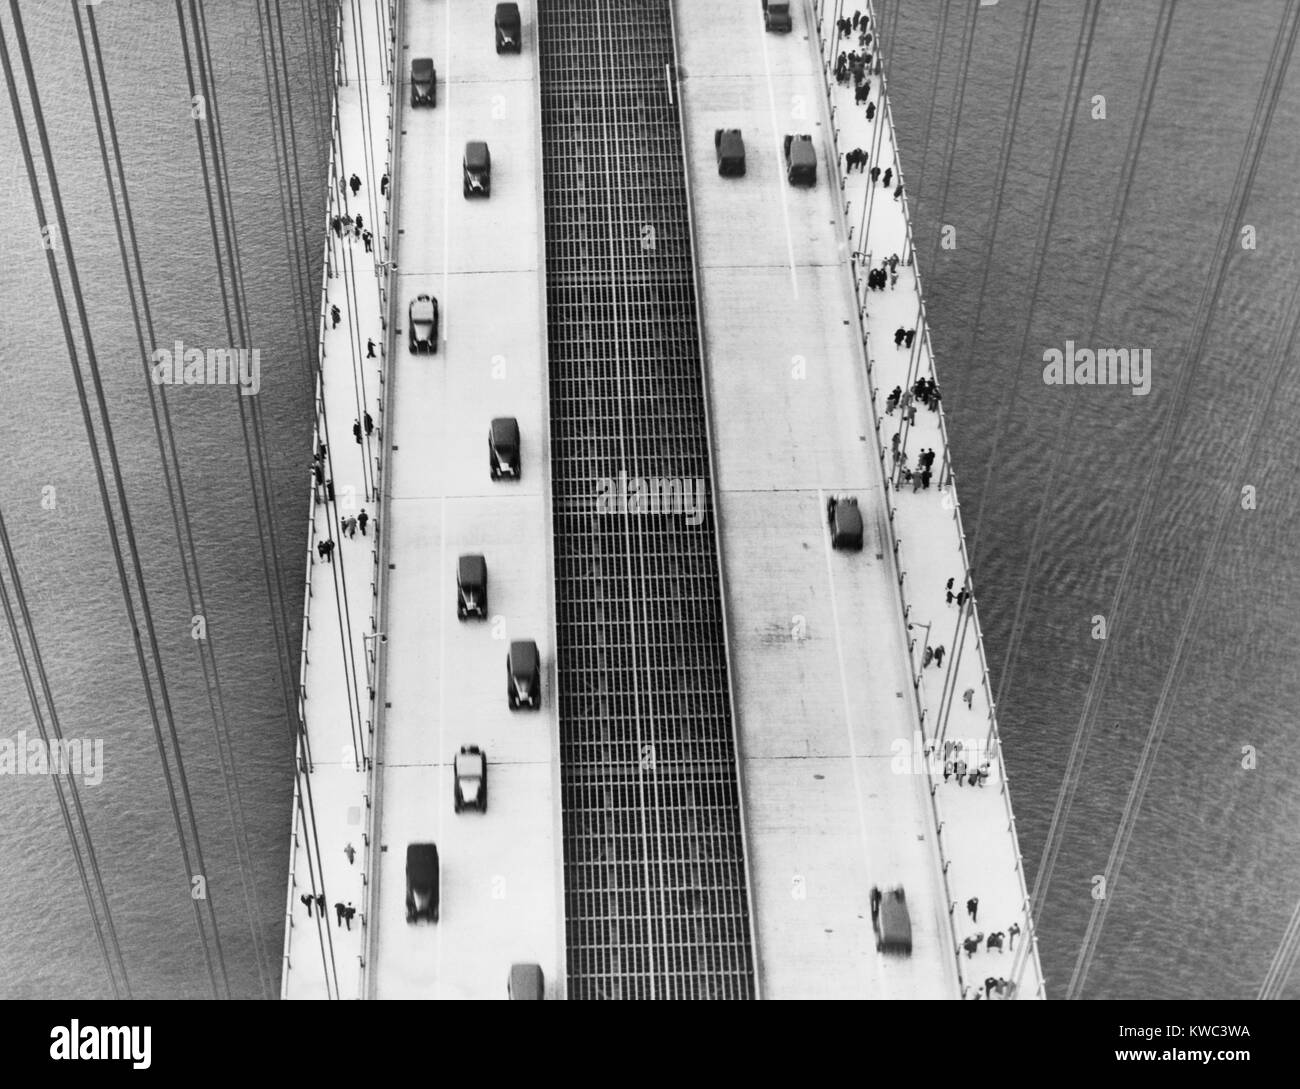 Aerial view of George Washington Bridge, New York City, in the 1930s. It open on October 24, 1931 and was the world's longest bridge until superseded by the Gold Gate Bridge in 1937. (BSLOC 2015 14 196) Stock Photo